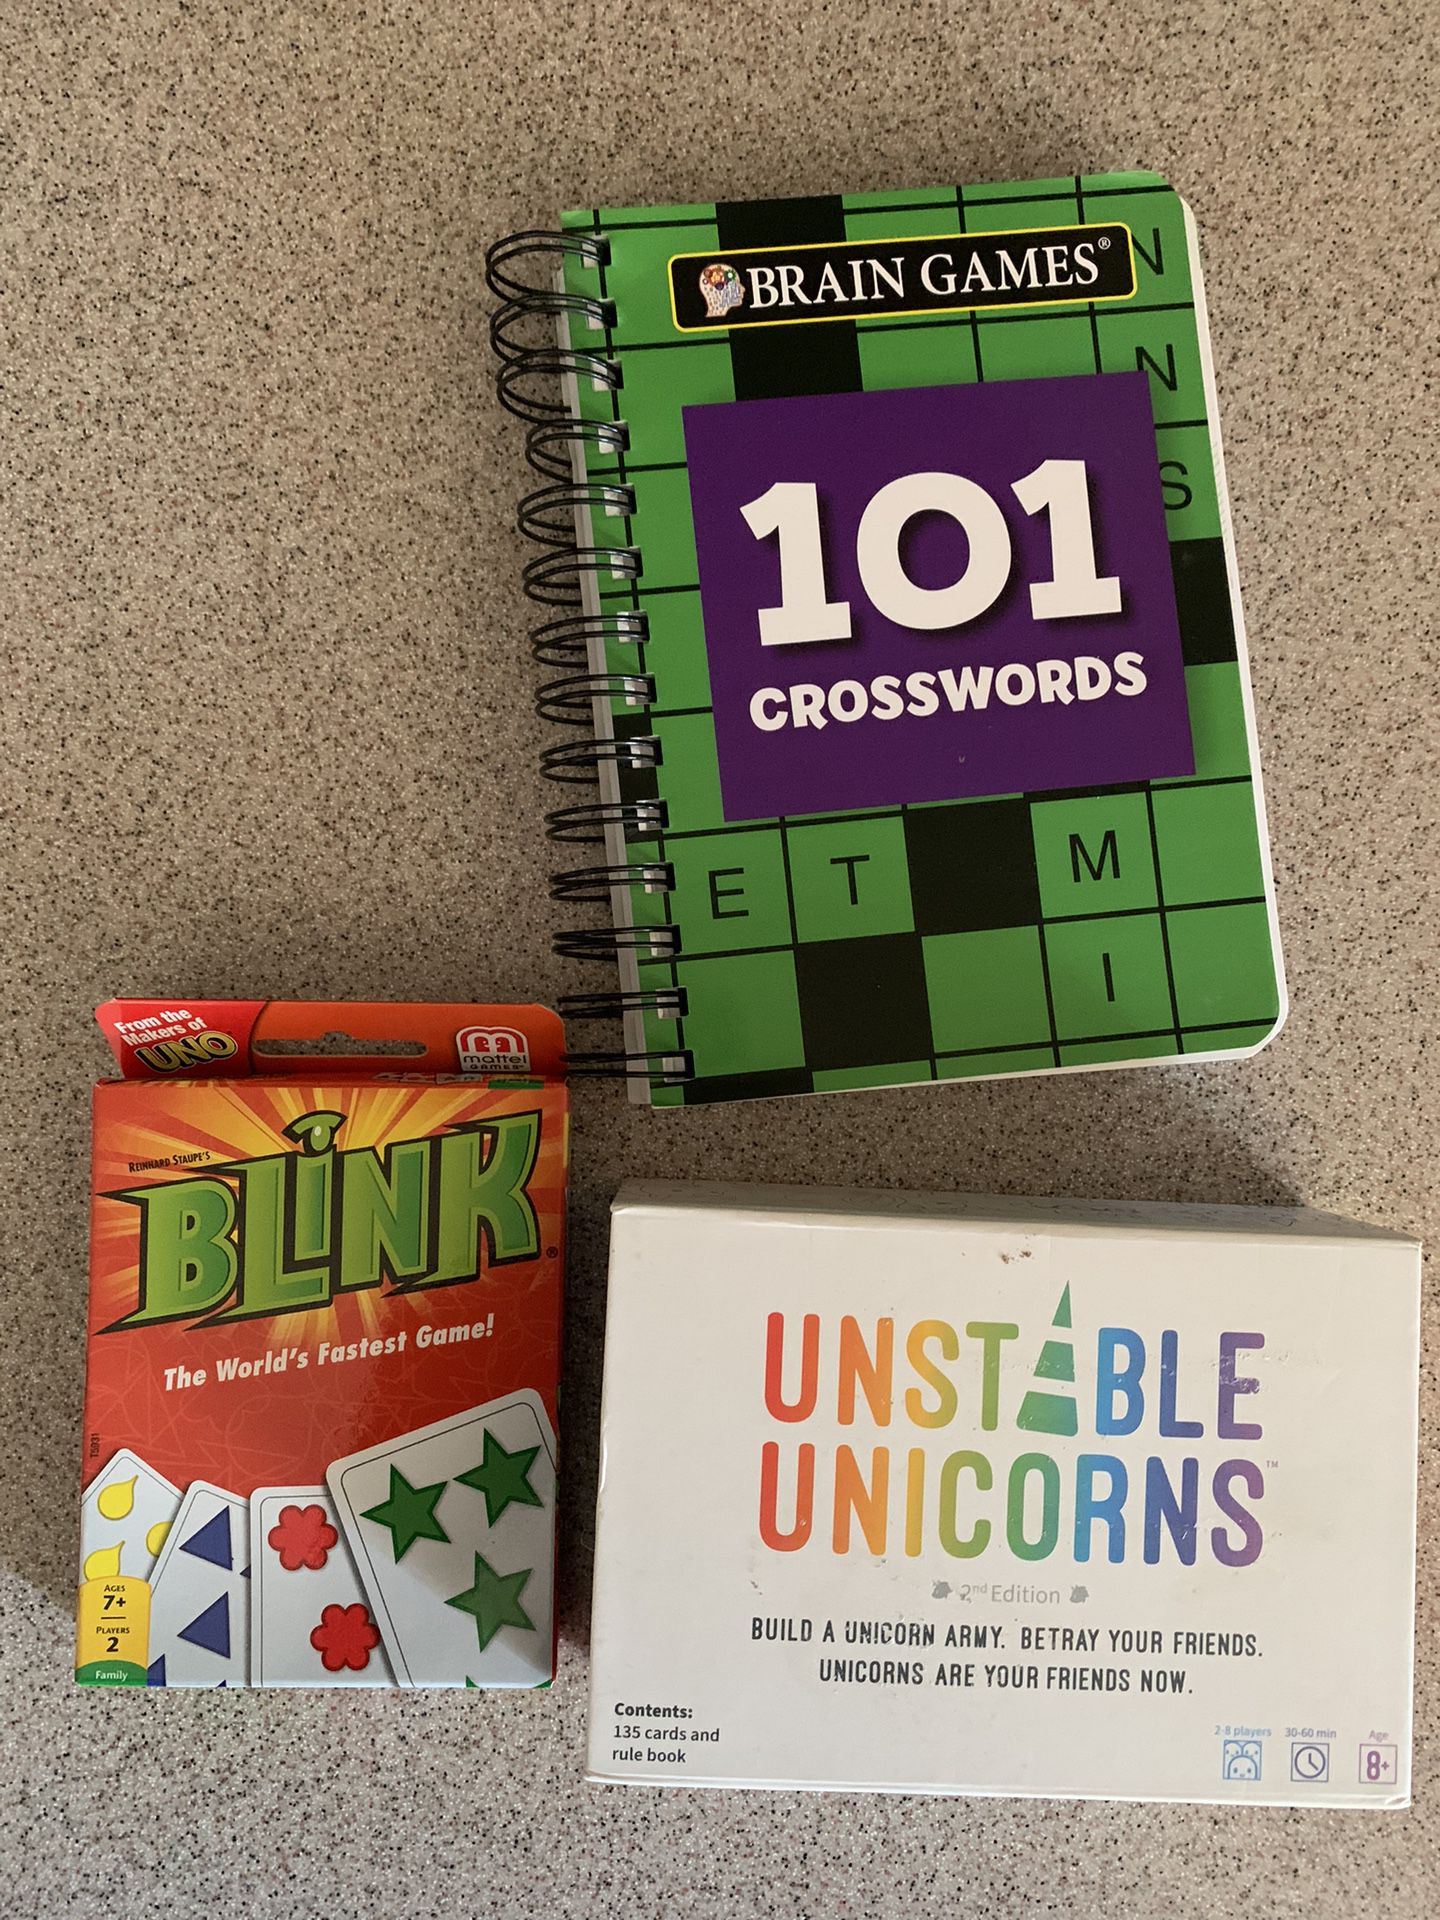 Crossword Puzzles And Card Games